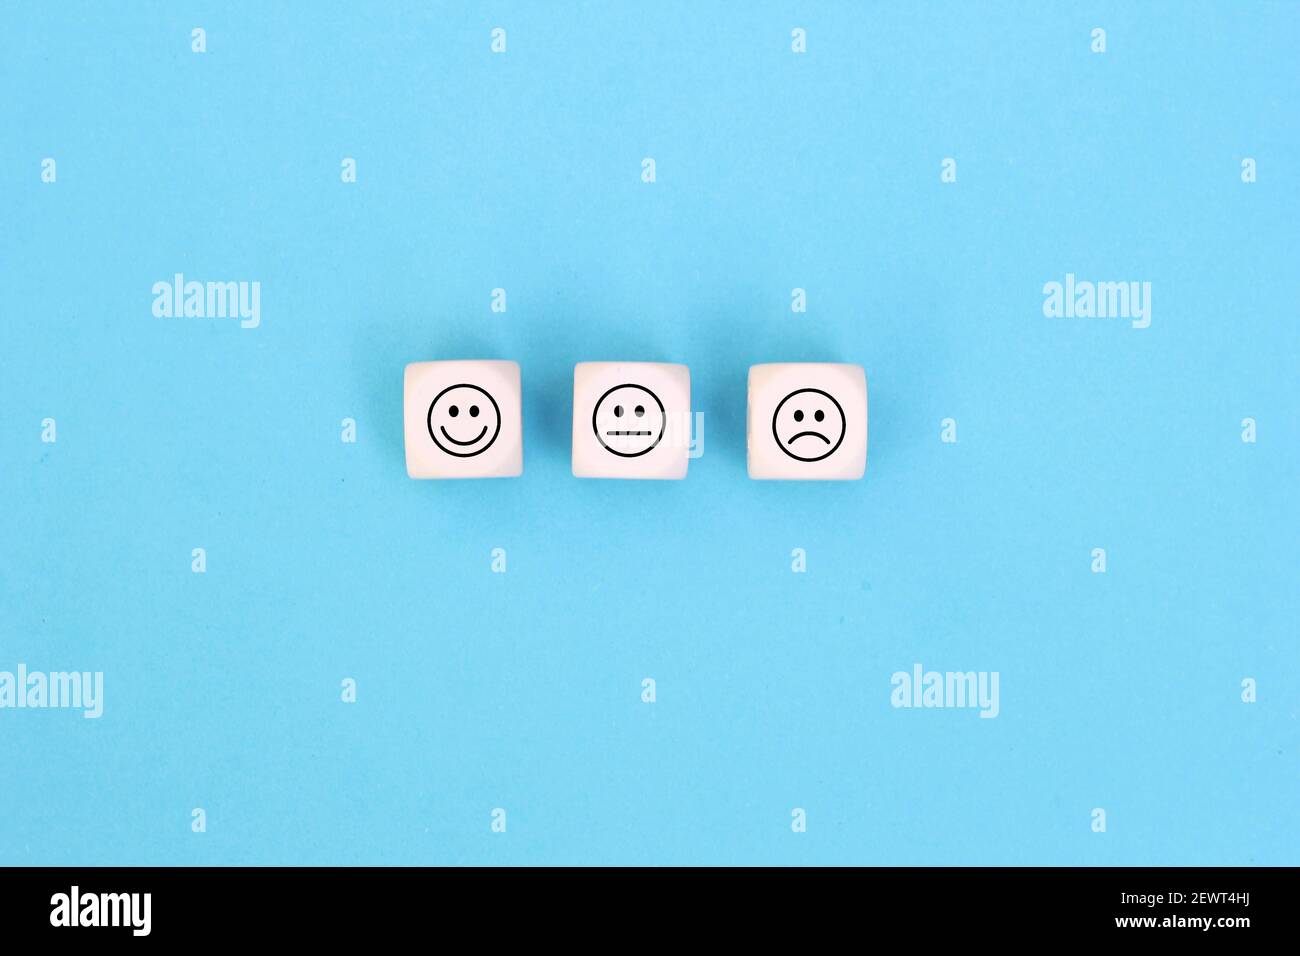 Happy sad and neutral smile faces on wooden blocks on Blue background. Customer satisfaction, evaluation or feedback concept. Stock Photo